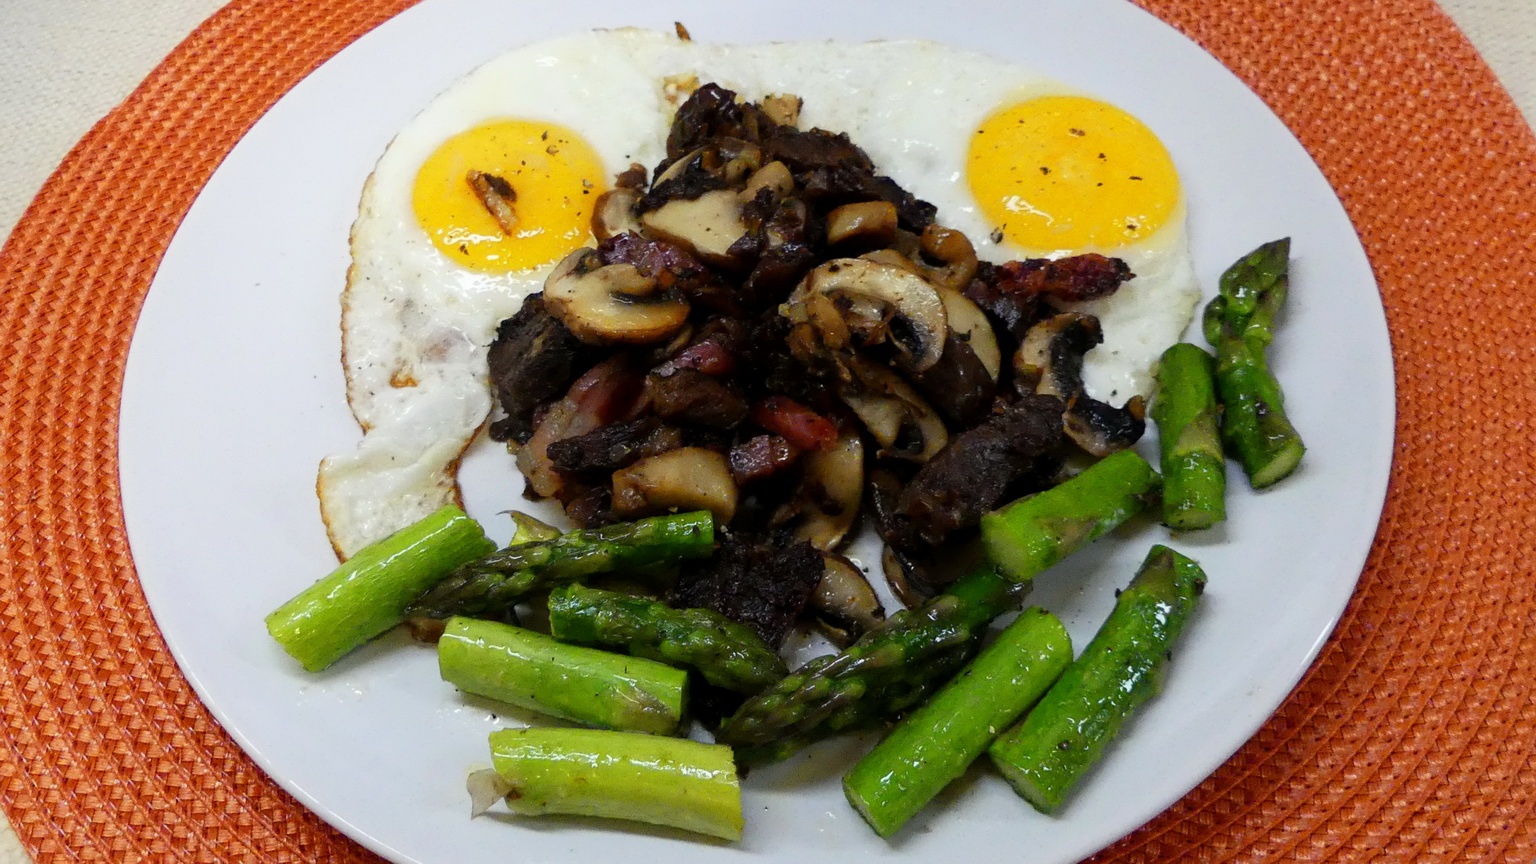 Sunny Side Up Eggs with Mushroom, Bacon, Beef and Asparagus